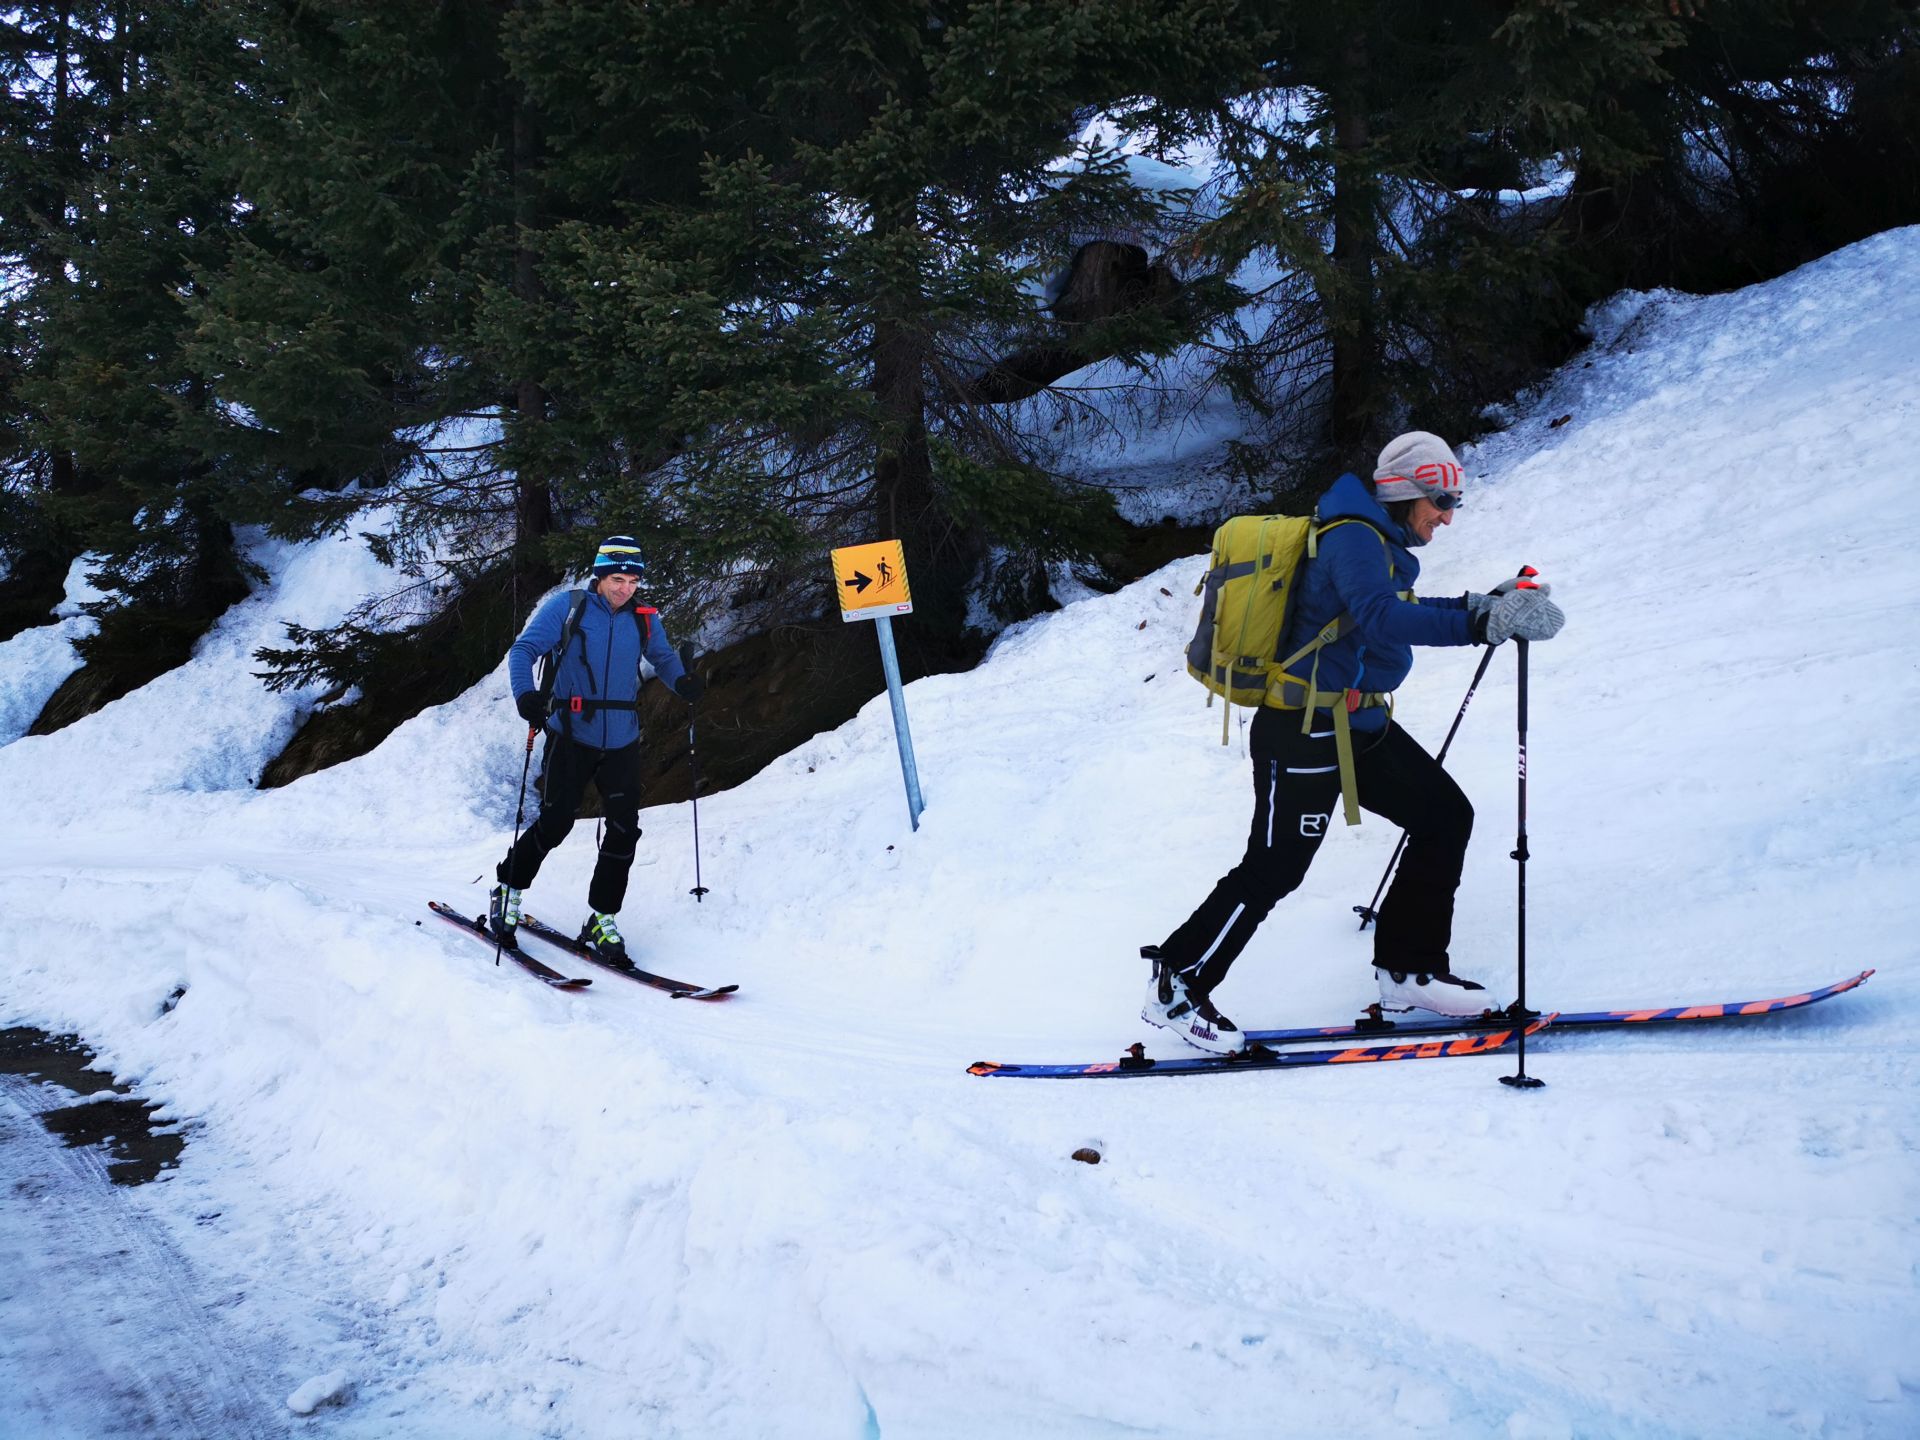 two ski mountaineers on the way up